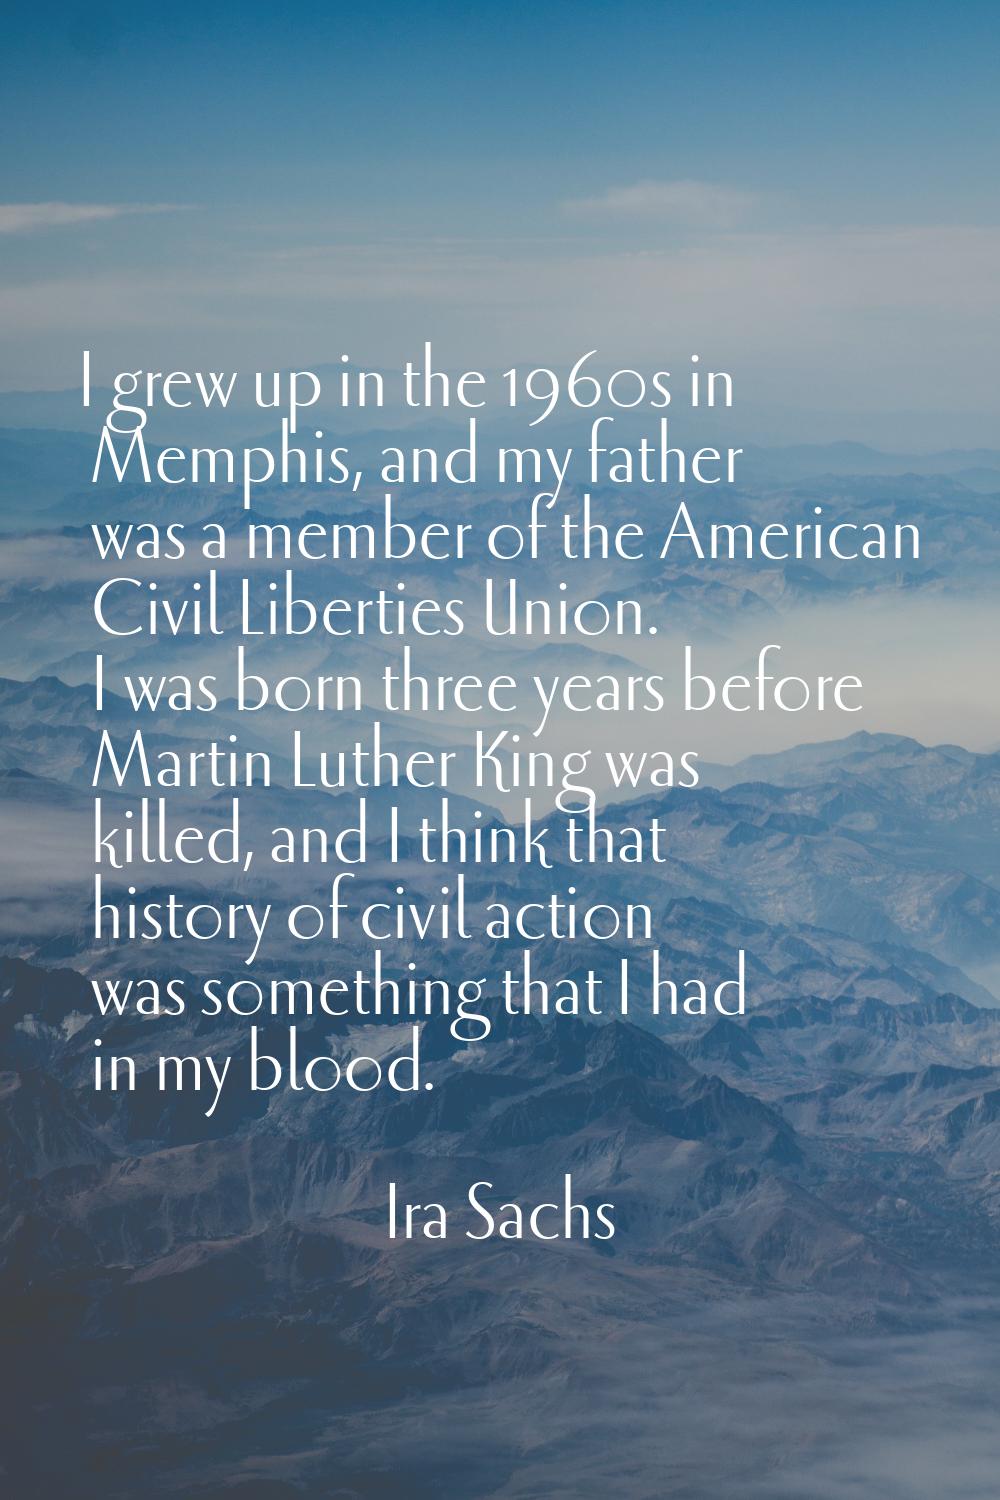 I grew up in the 1960s in Memphis, and my father was a member of the American Civil Liberties Union